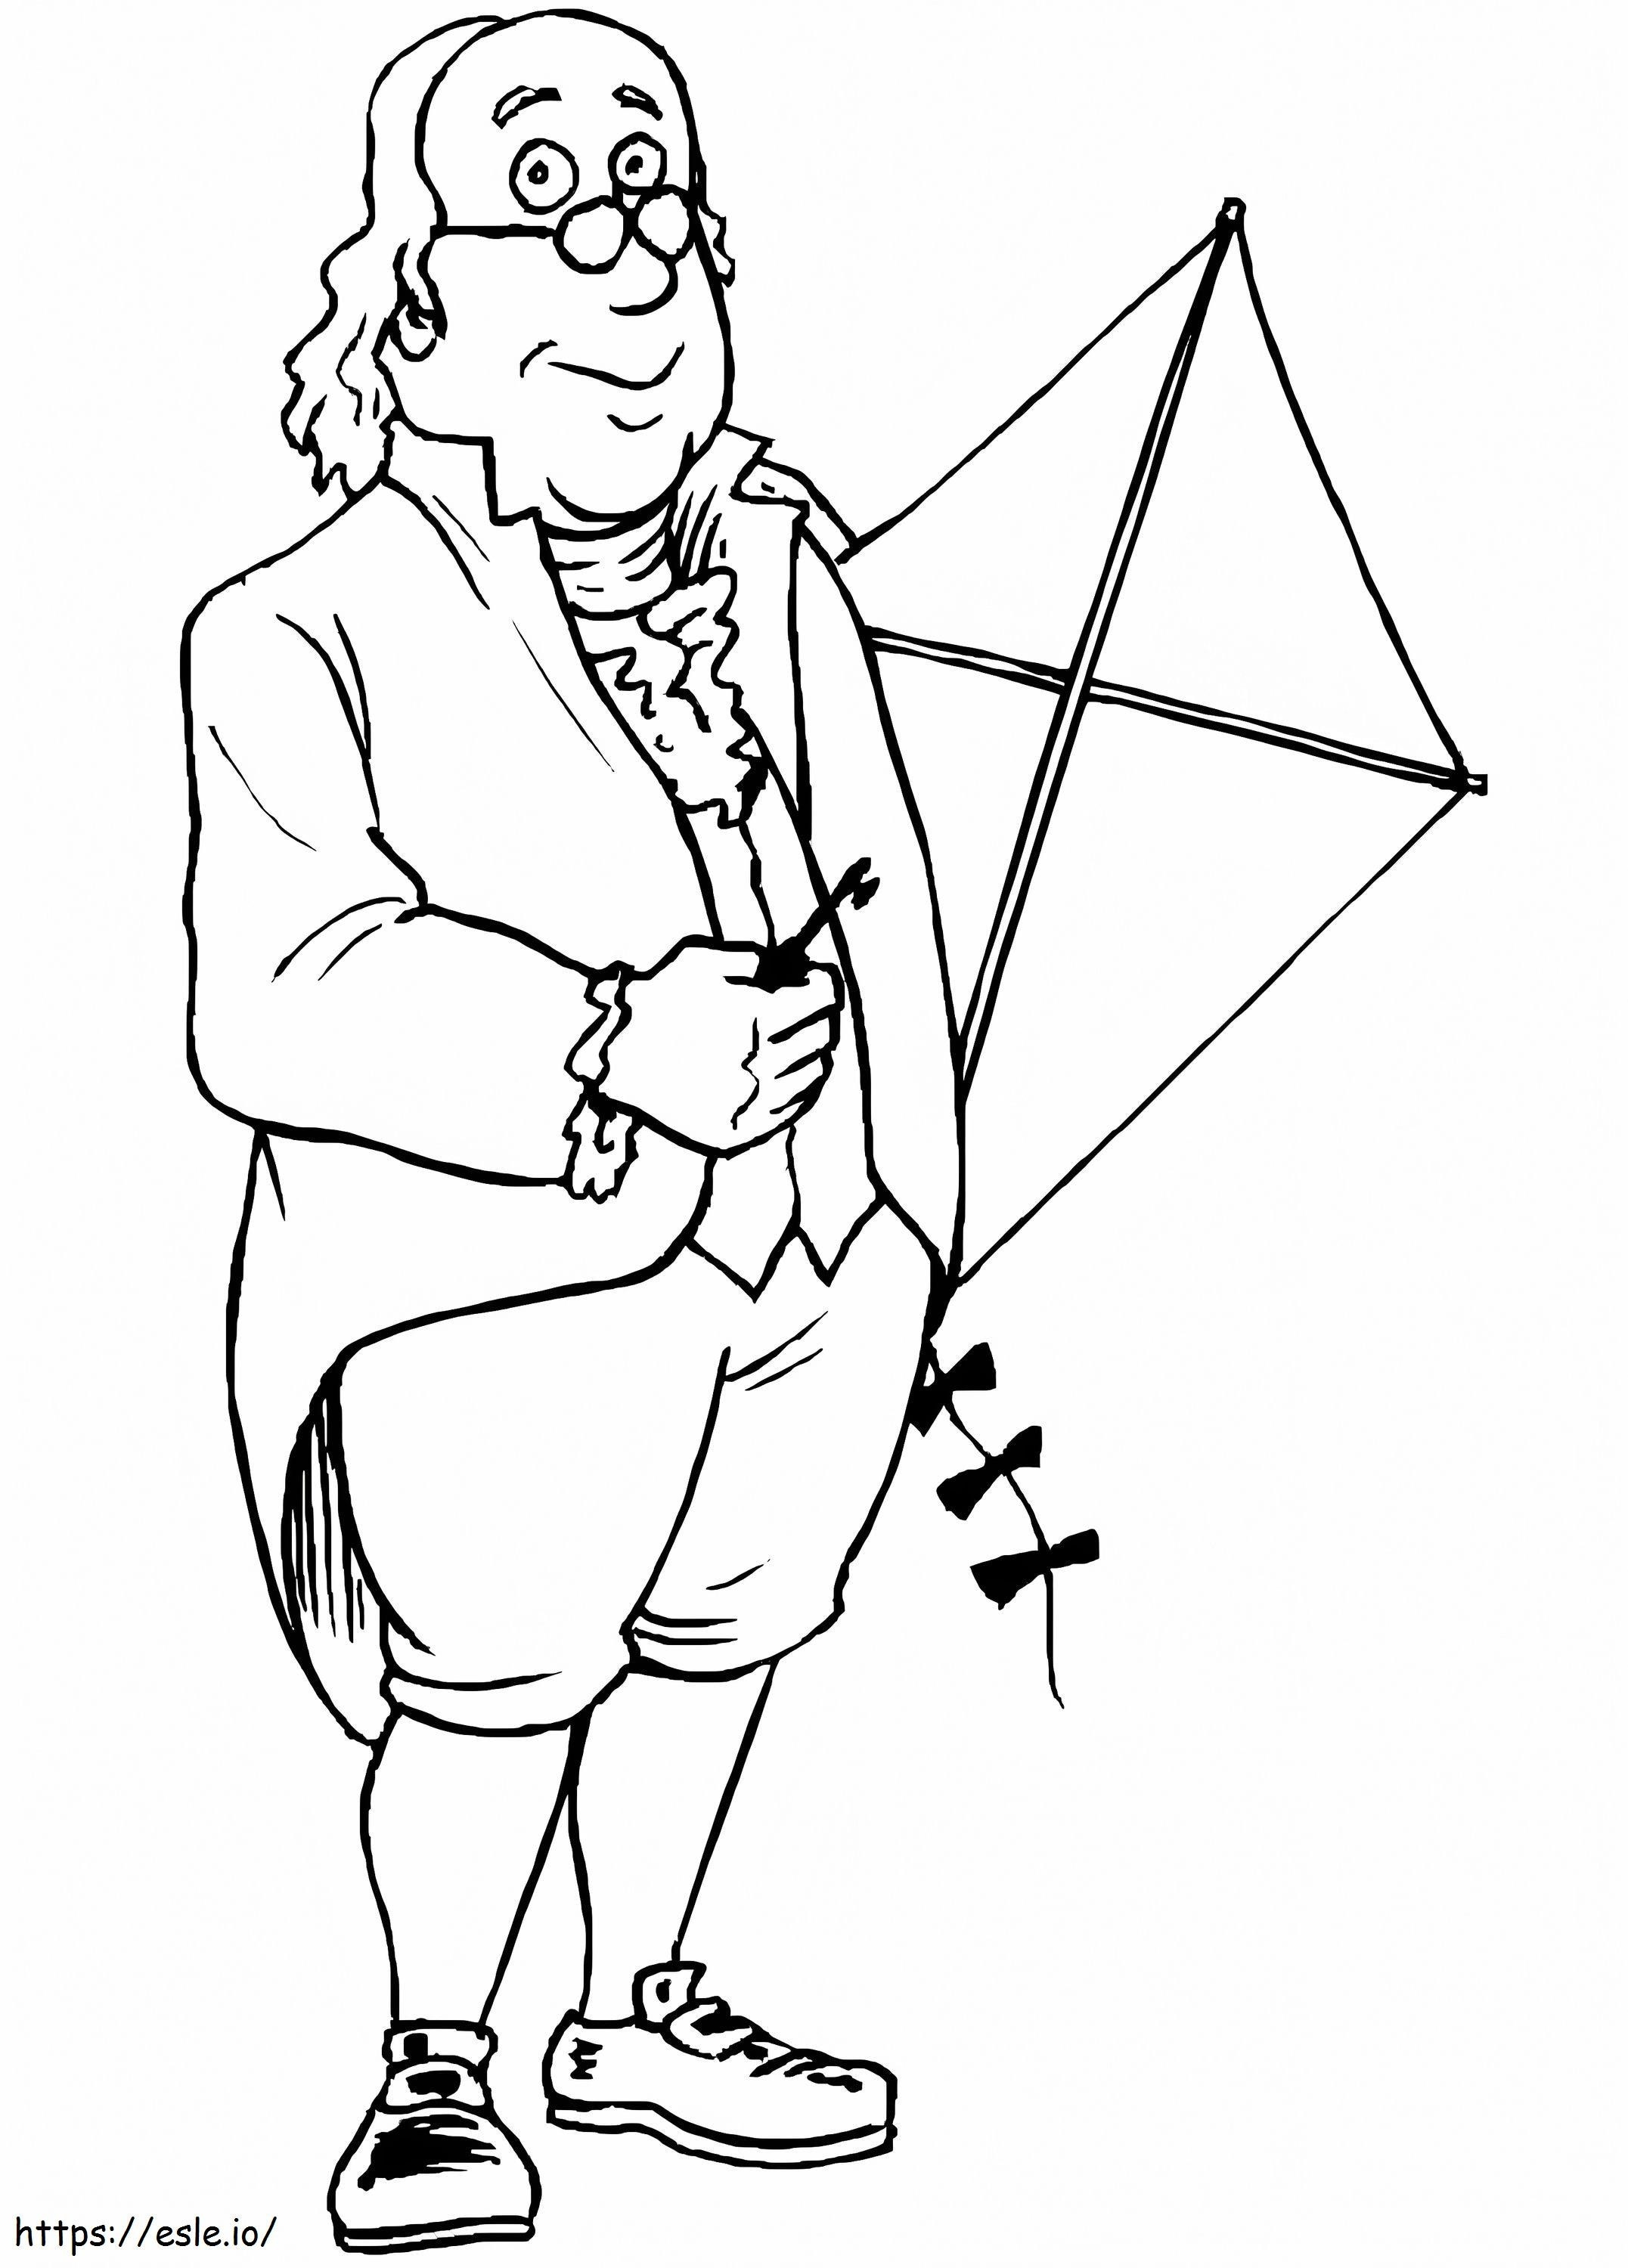 Benjamin Franklin With Kite coloring page